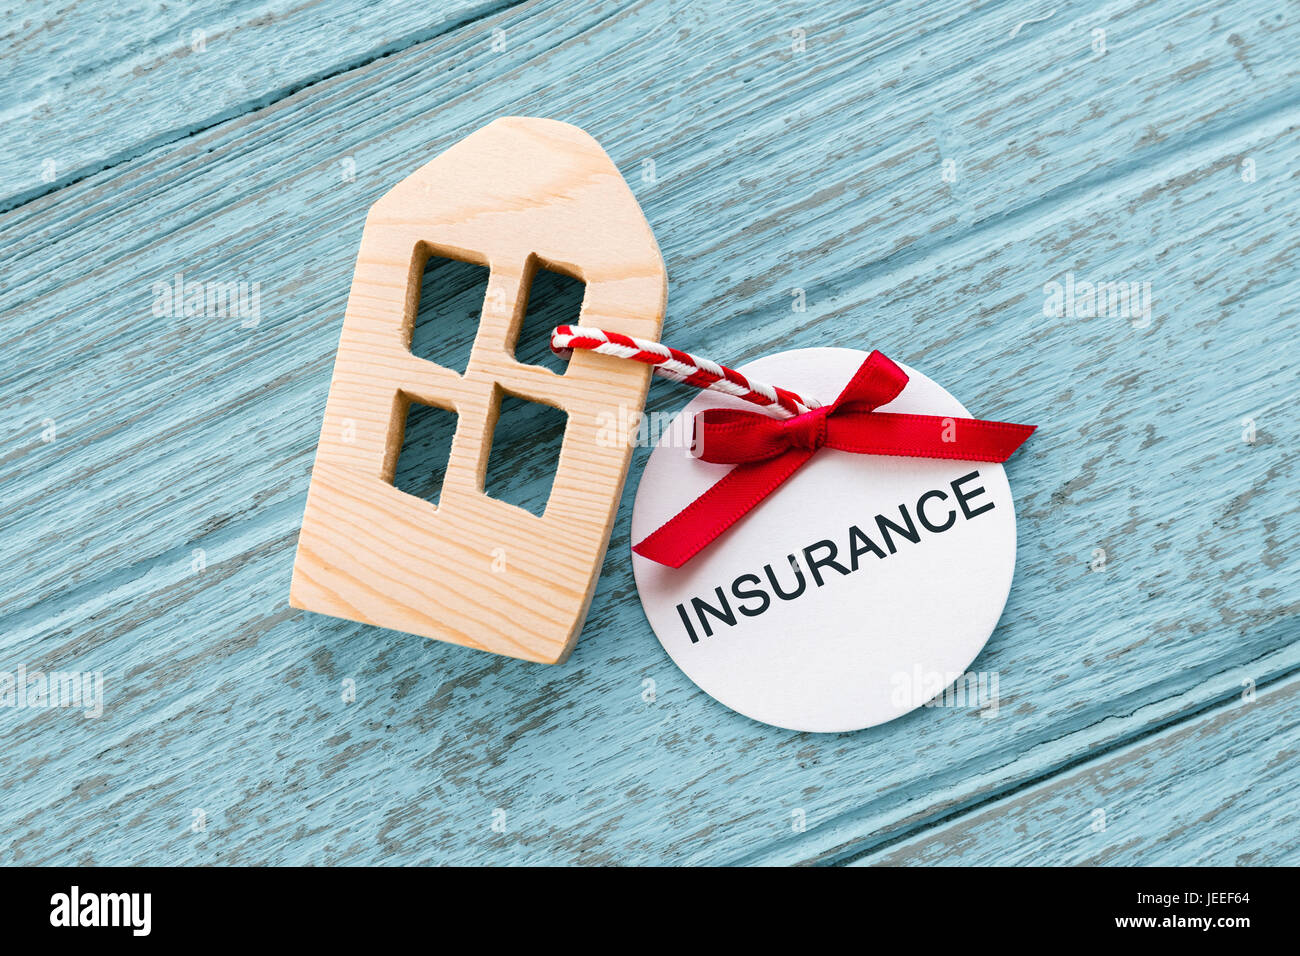 Home insurance concept with wood house and paper insurance tag Stock Photo